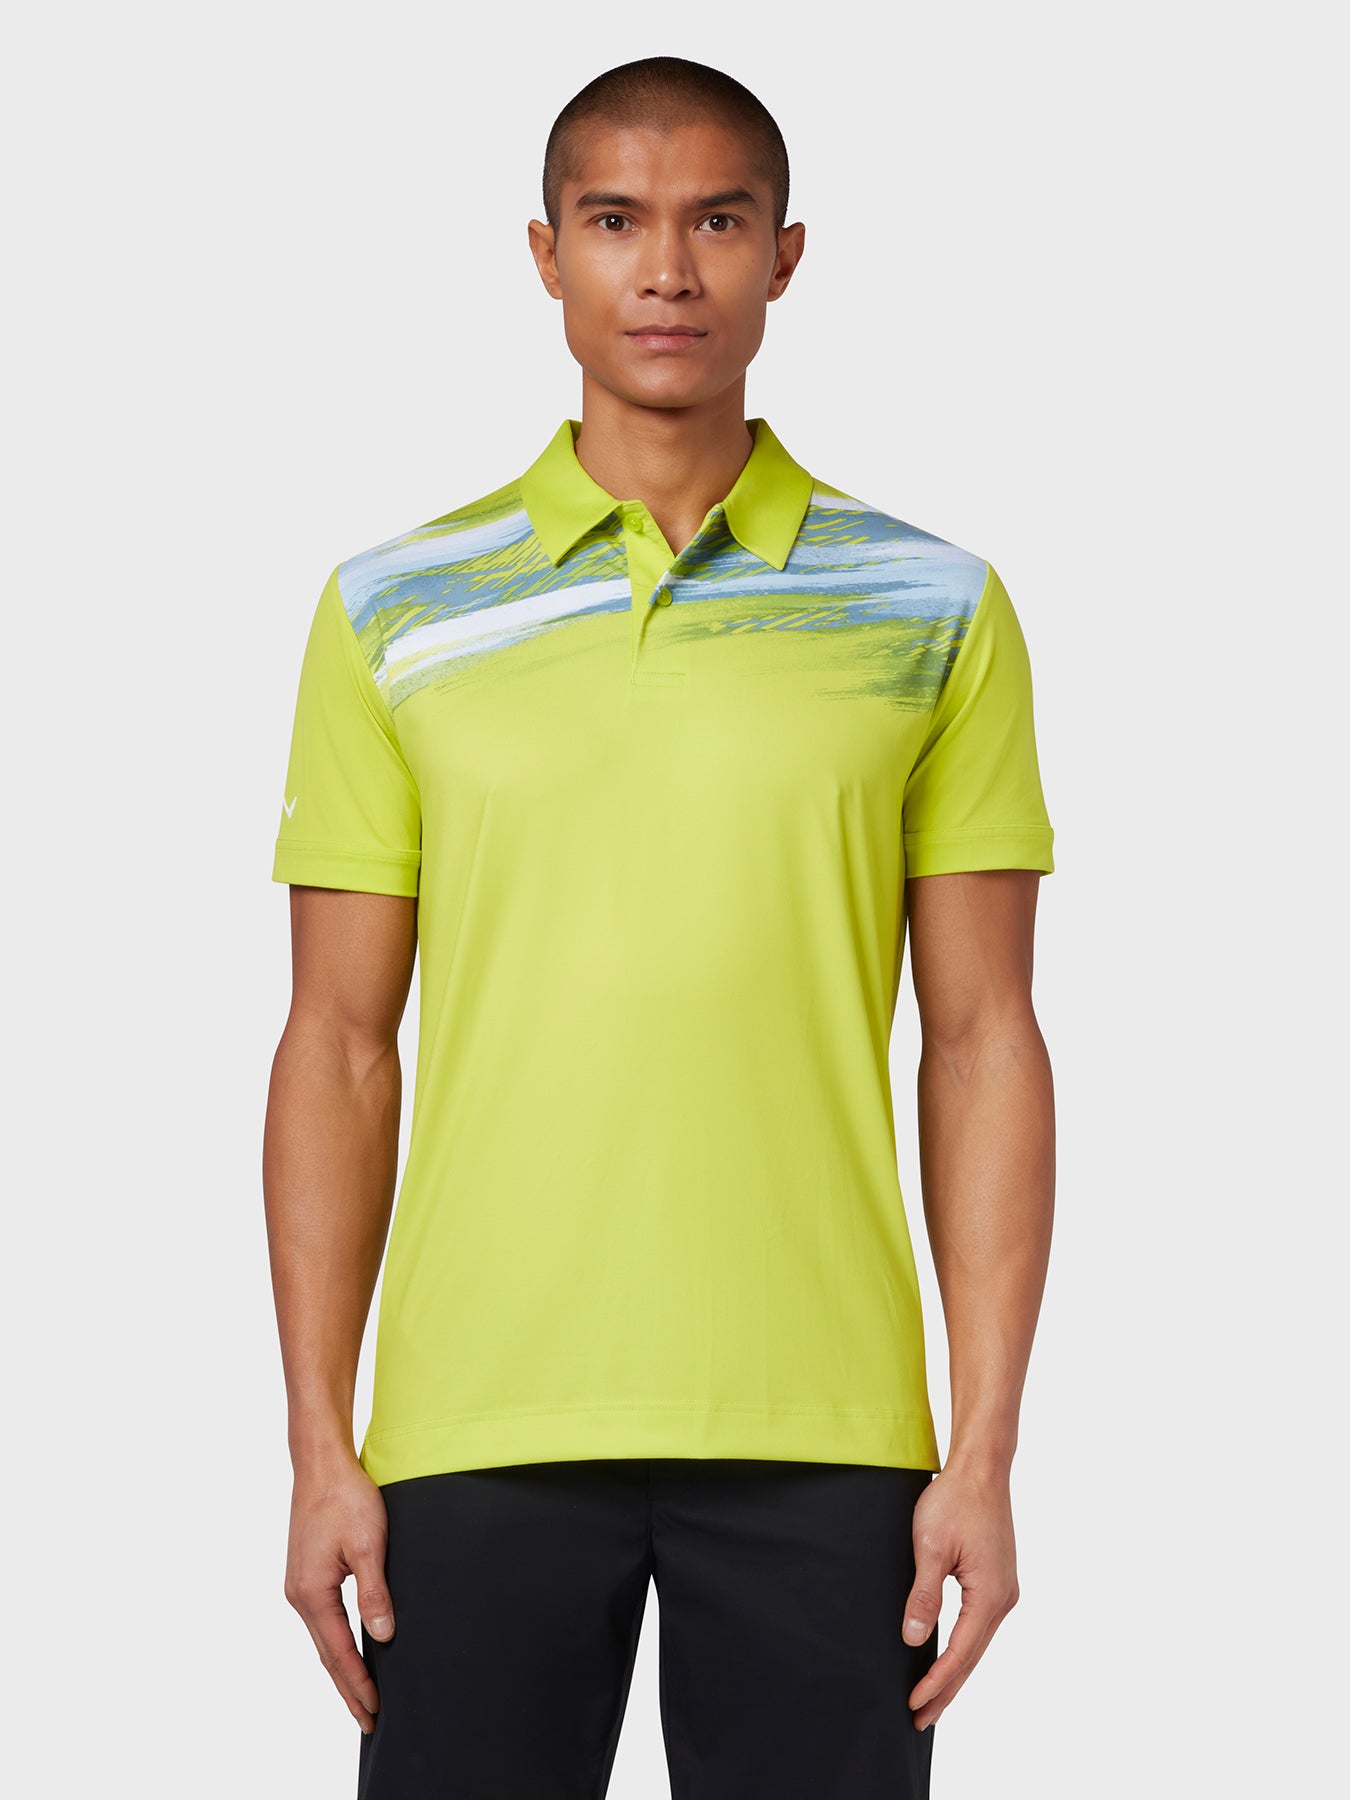 View X Series Active Textured Print Polo In Lime Punch Lime Punch L information